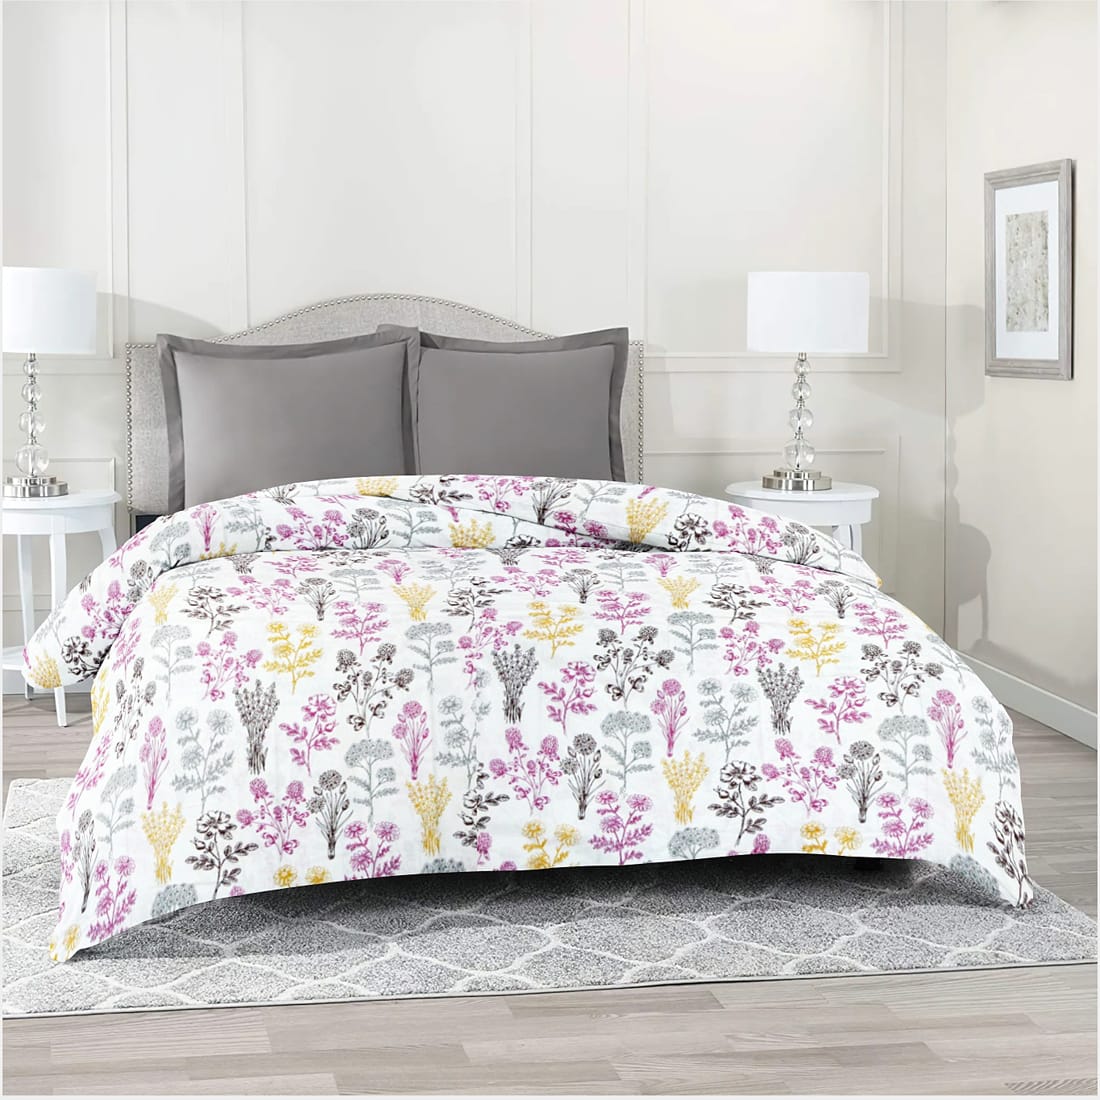 Comfy 250 TC Pink Floral Print Cotton Duvet Cover online in India